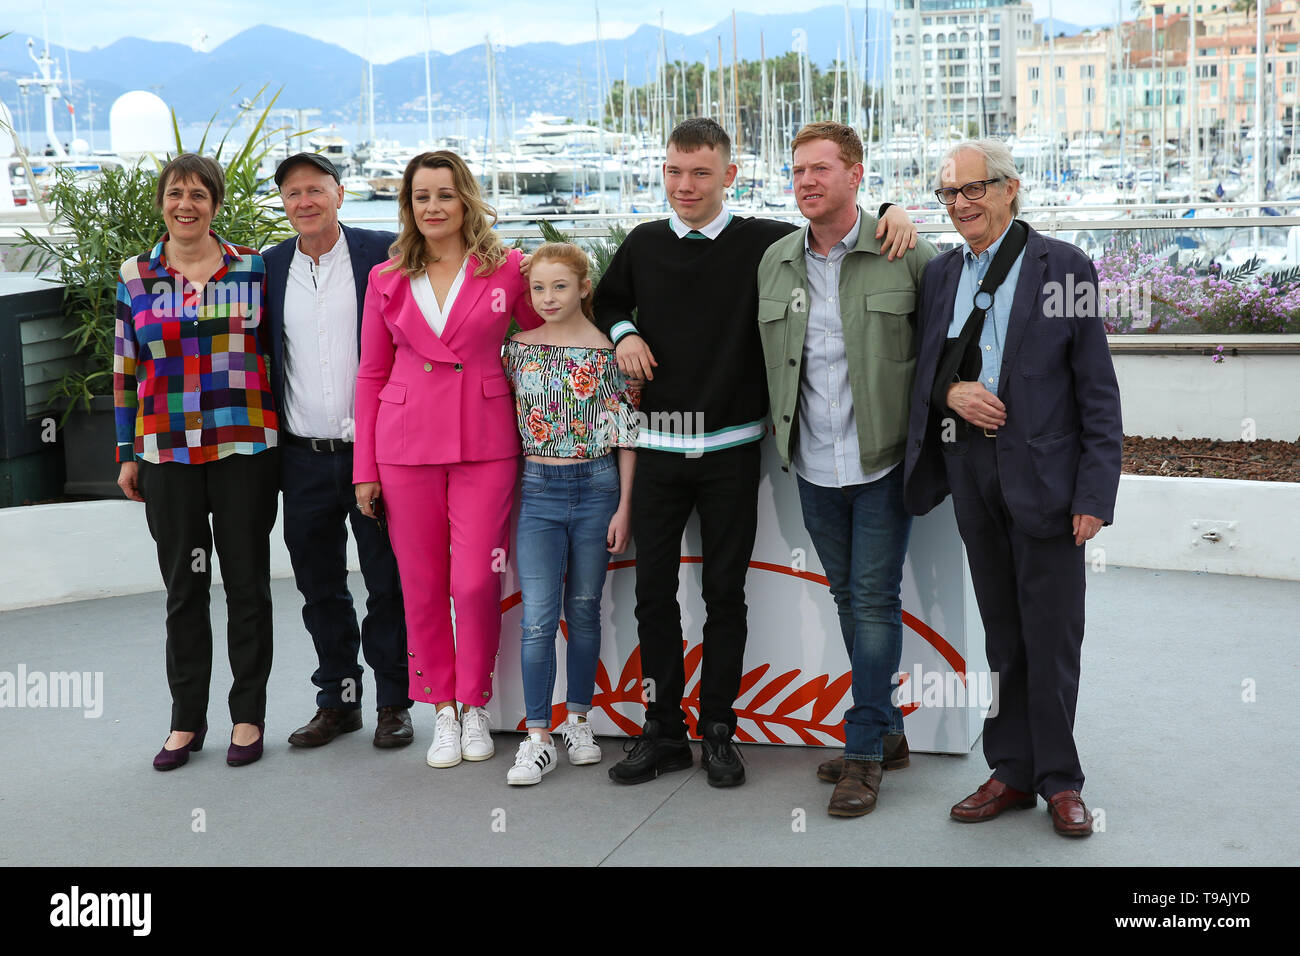 Cannes, France. 17th May, 2019. (L-R) Rebecca O'Brien, Paul Laverty, Debbie Honeywood, Katie Proctor, Rhys Stone, Kris Hitchen and director Ken Loach pose during a photocall for the film 'Sorry We Missed You' at the 72nd Cannes Film Festival in Cannes, France, May 17, 2019. British director Ken Loach's film 'Sorry We Missed You' will compete for the Palme d'Or with other 20 feature films during the 72nd Cannes Film Festival which is held from May 14 to 25. Credit: Zhang Cheng/Xinhua/Alamy Live News Stock Photo